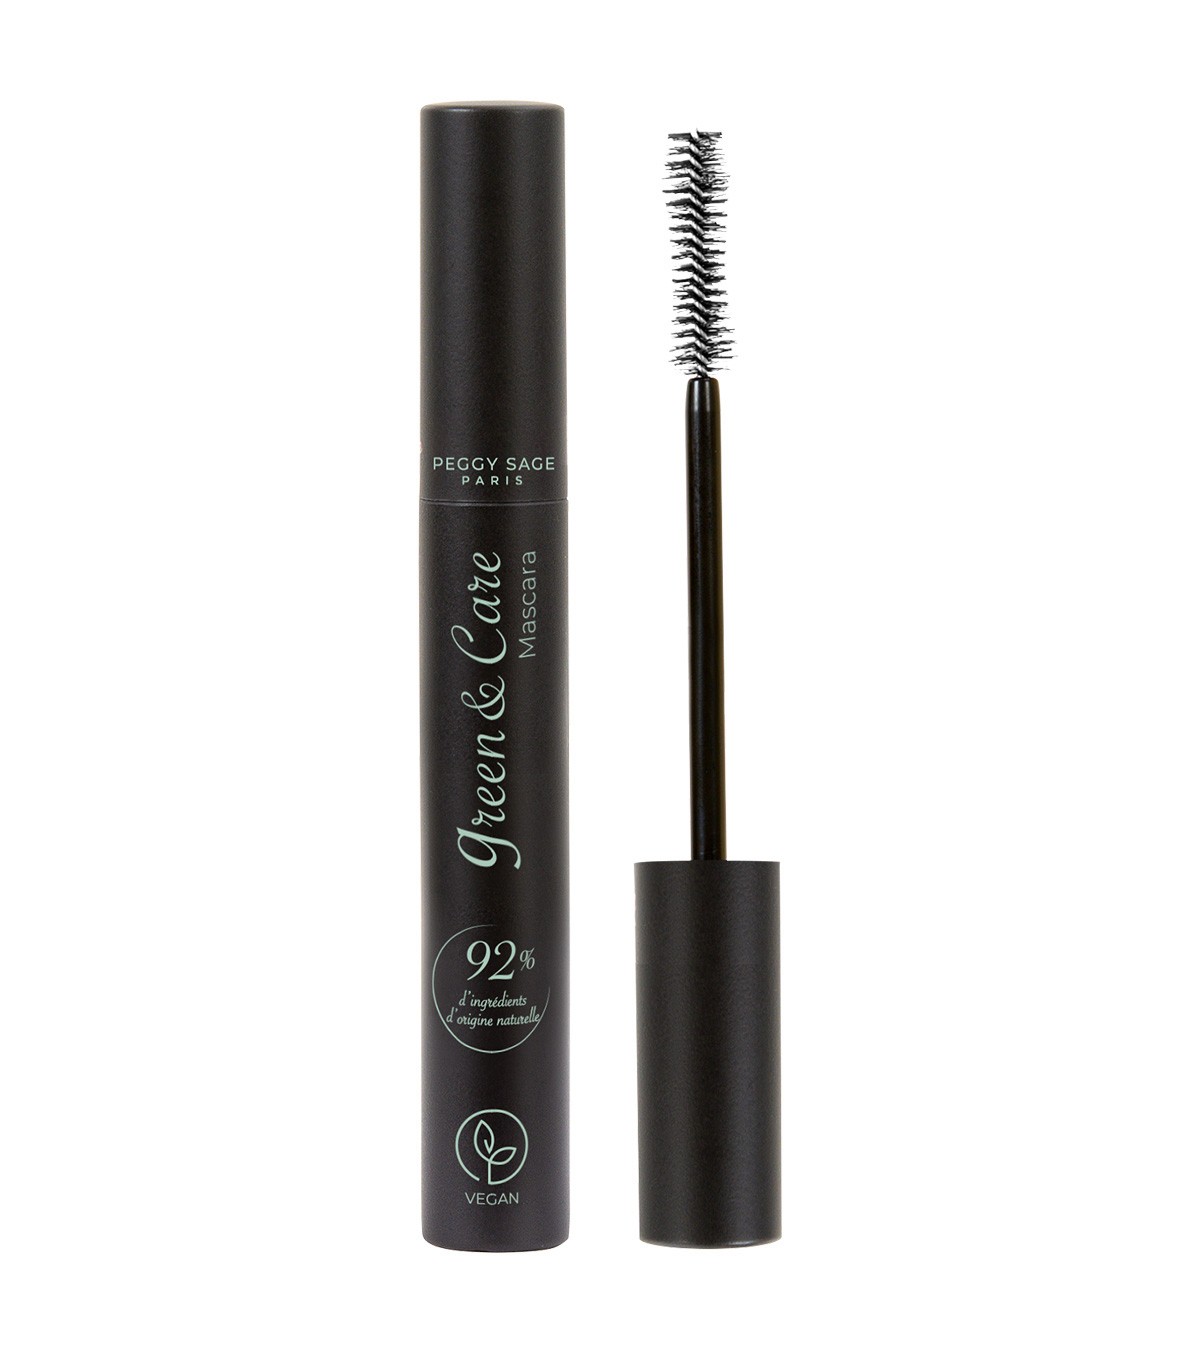 Peggy Sage GREEN and CARE Mascara noir 8ml